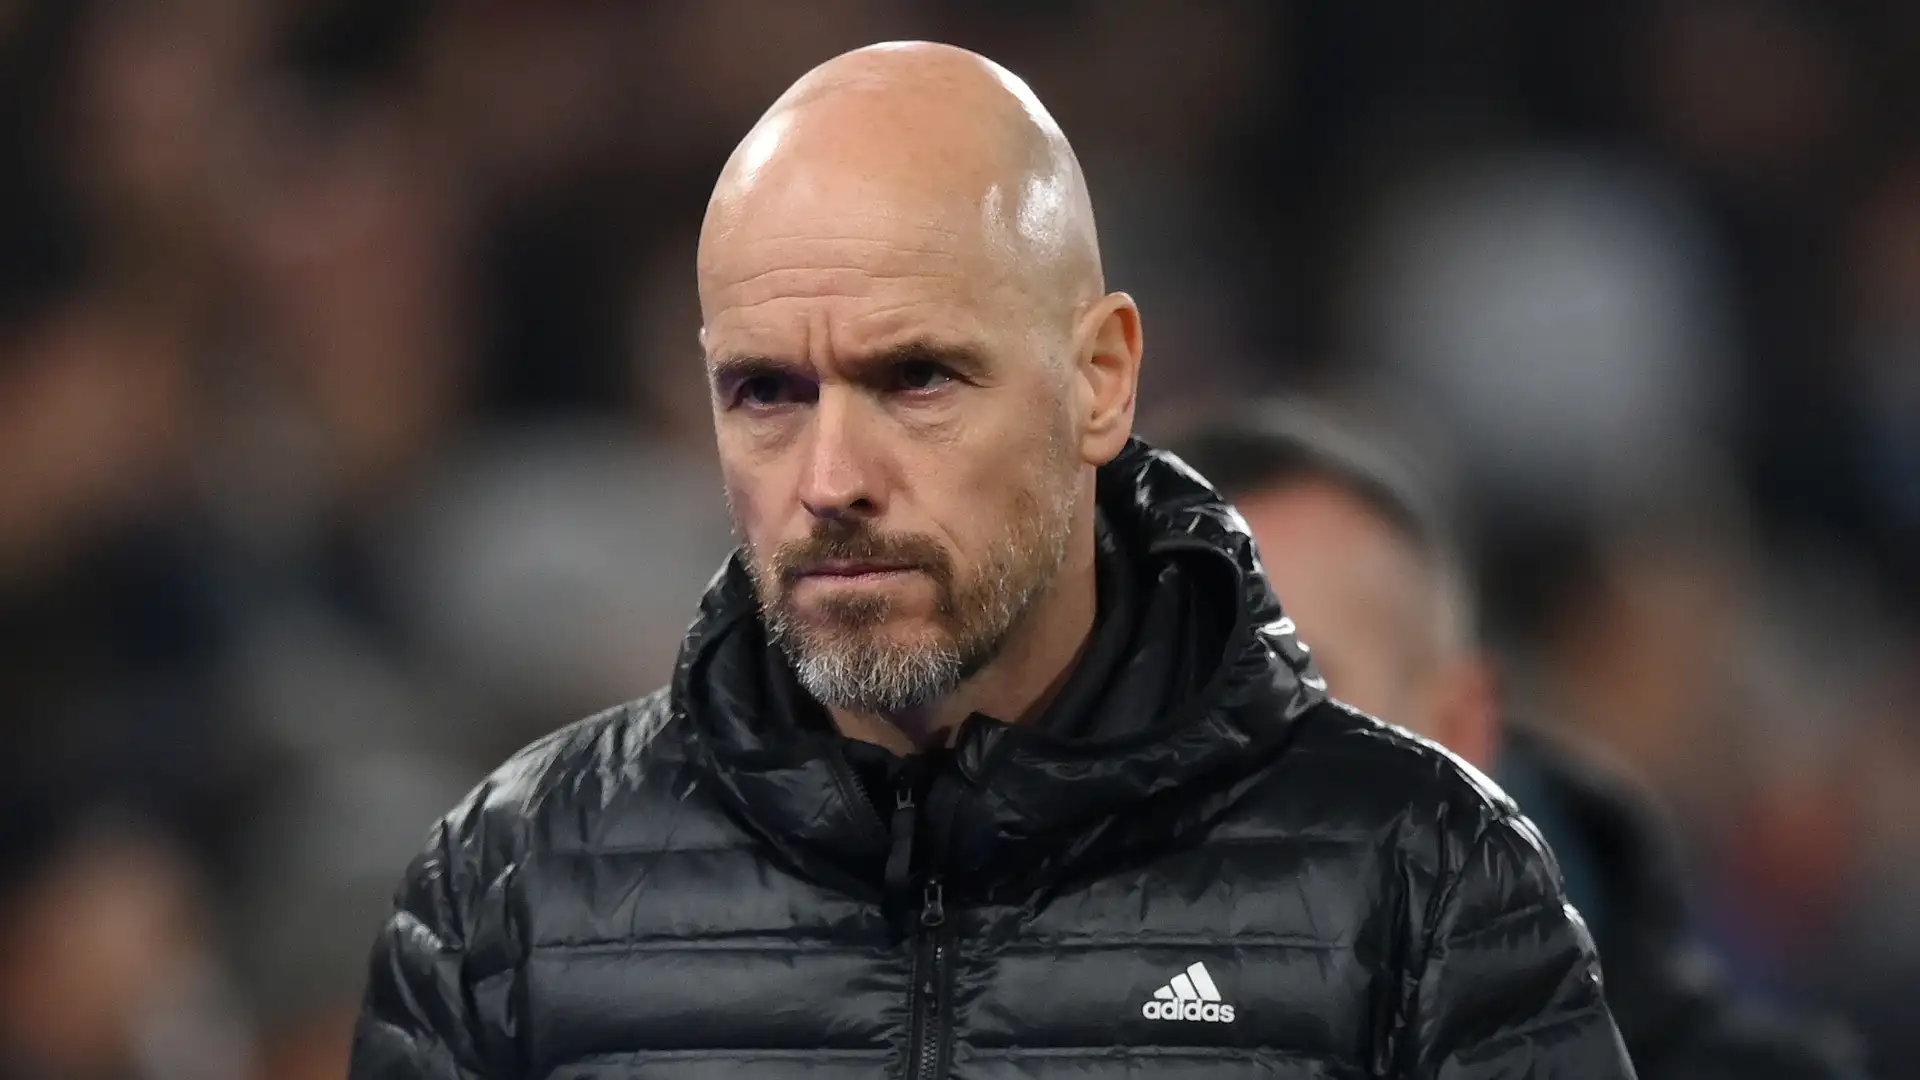 Erik ten Hag told his main 'mistake' at Man Utd as Marco van Basten gives surprising opinion on under-fire manager's future amid mounting sack talk